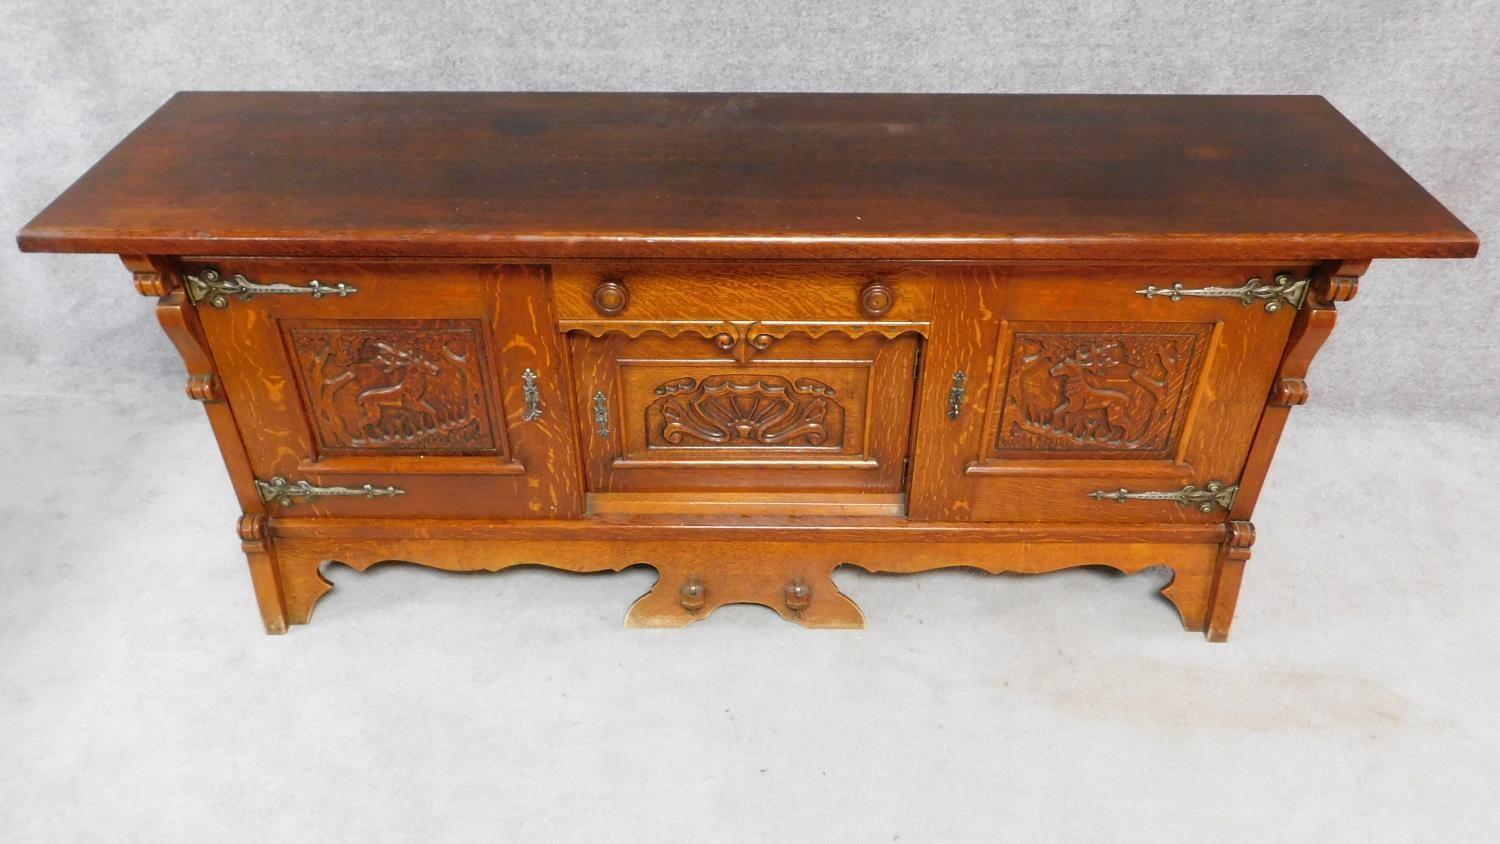 A mid 20th century Continental carved oak sideboard decorated with animal and scroll work - Image 2 of 11